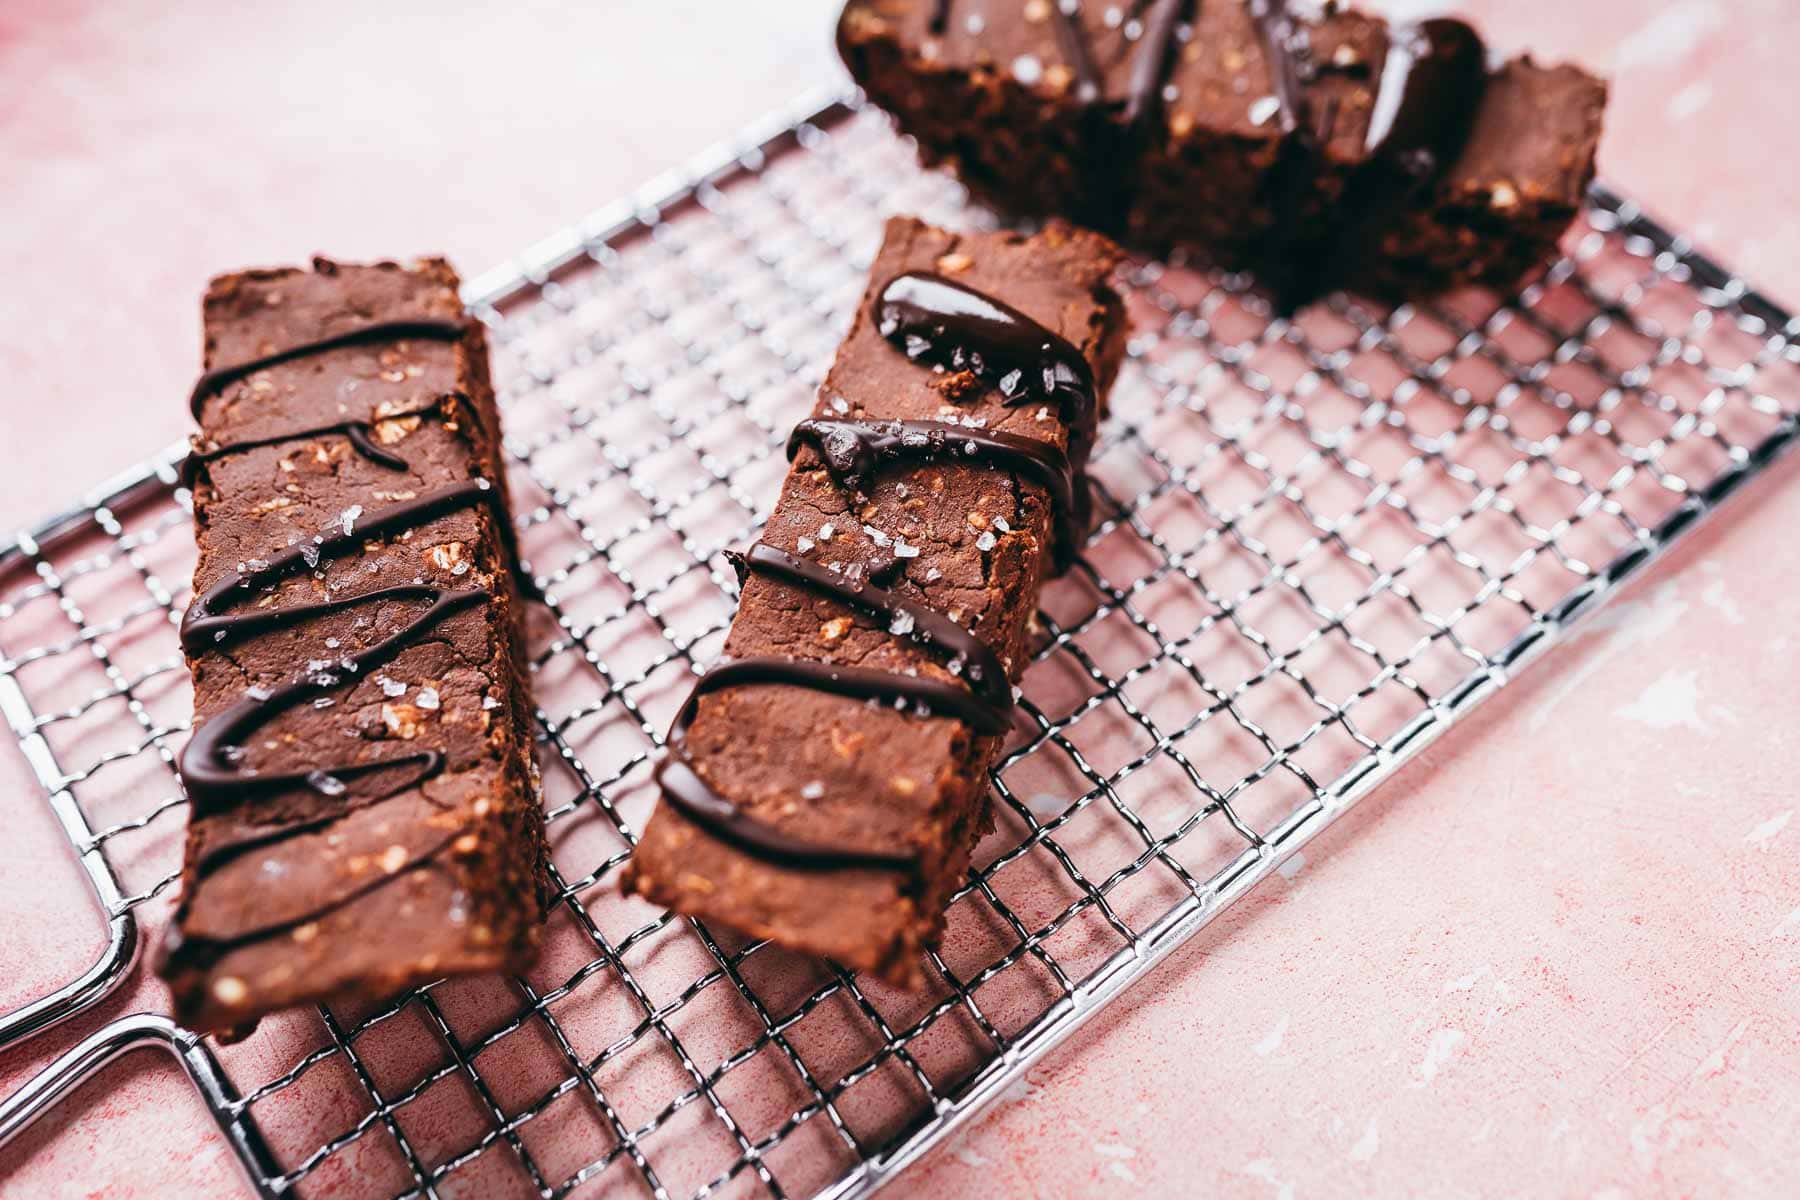 Chocolate protein bars resting on a silver cooling rack.